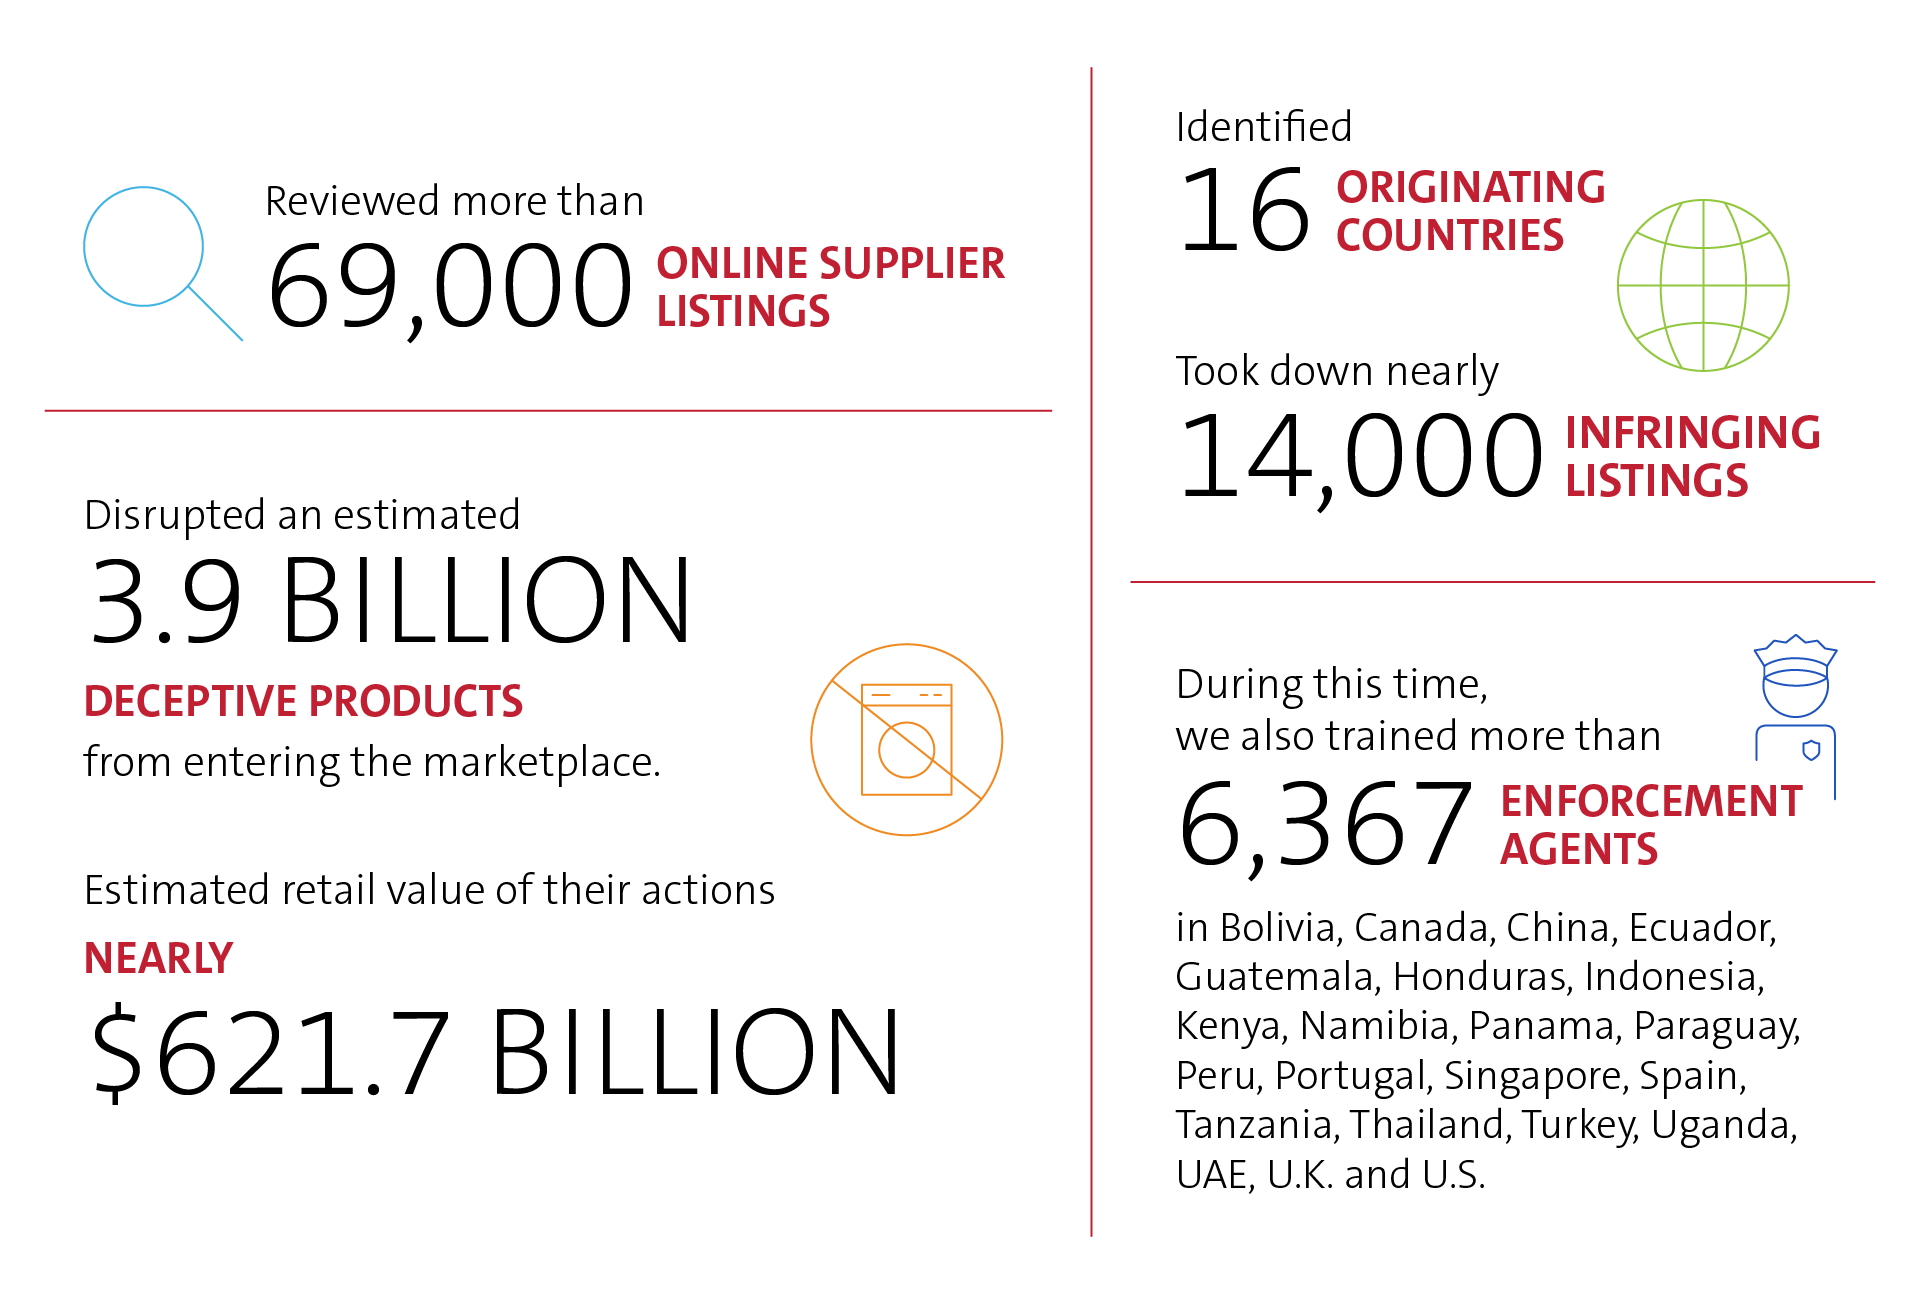 UL’s Global Security and Brand Protection initiative by the numbers